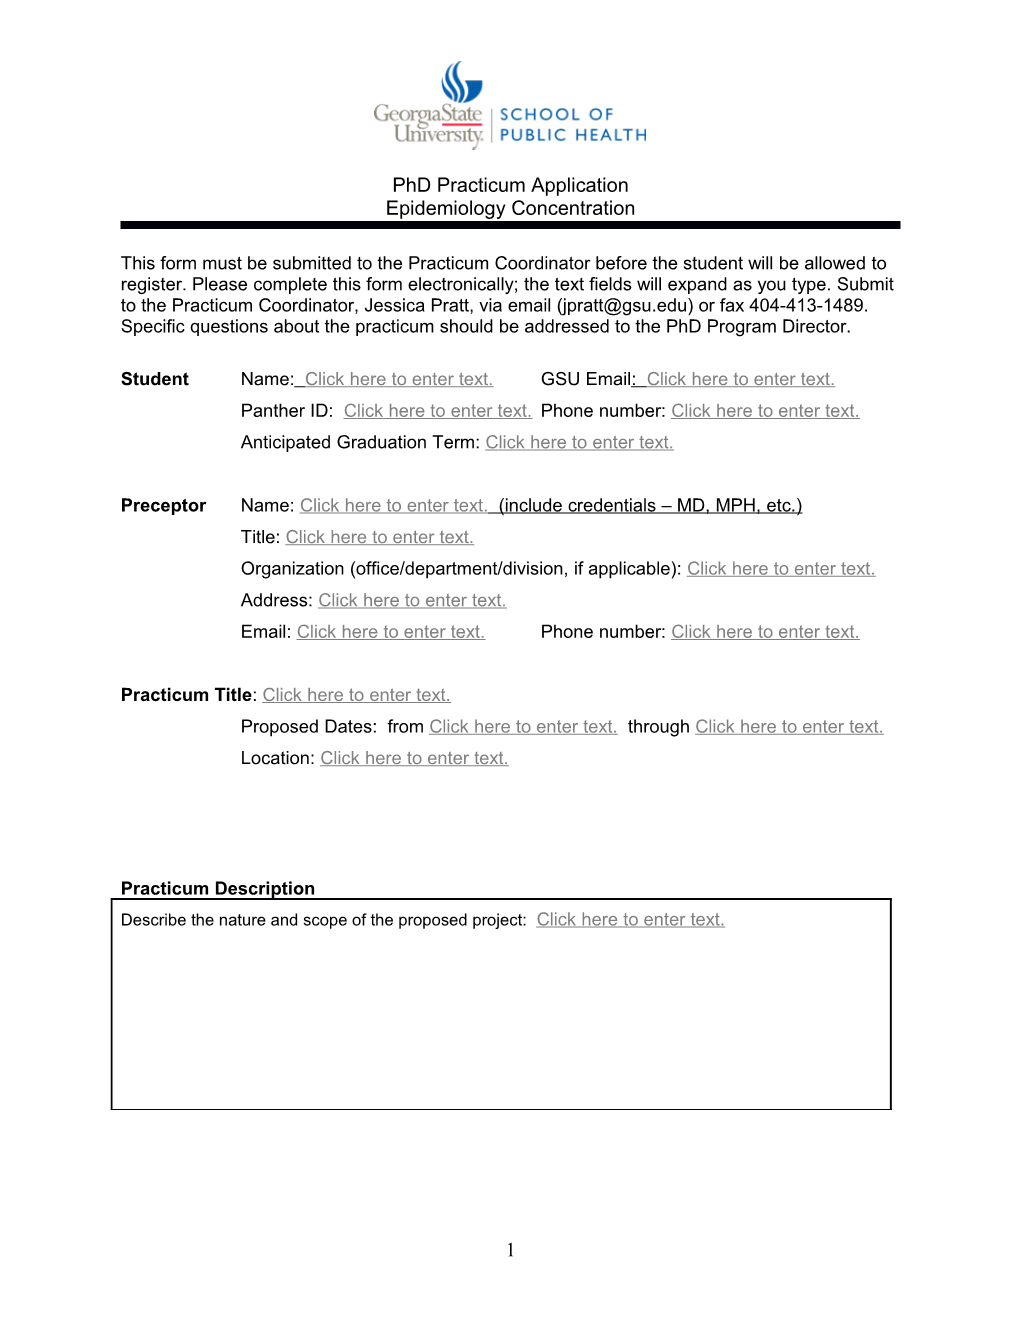 MPH Professional Experience Evaluation Form s1